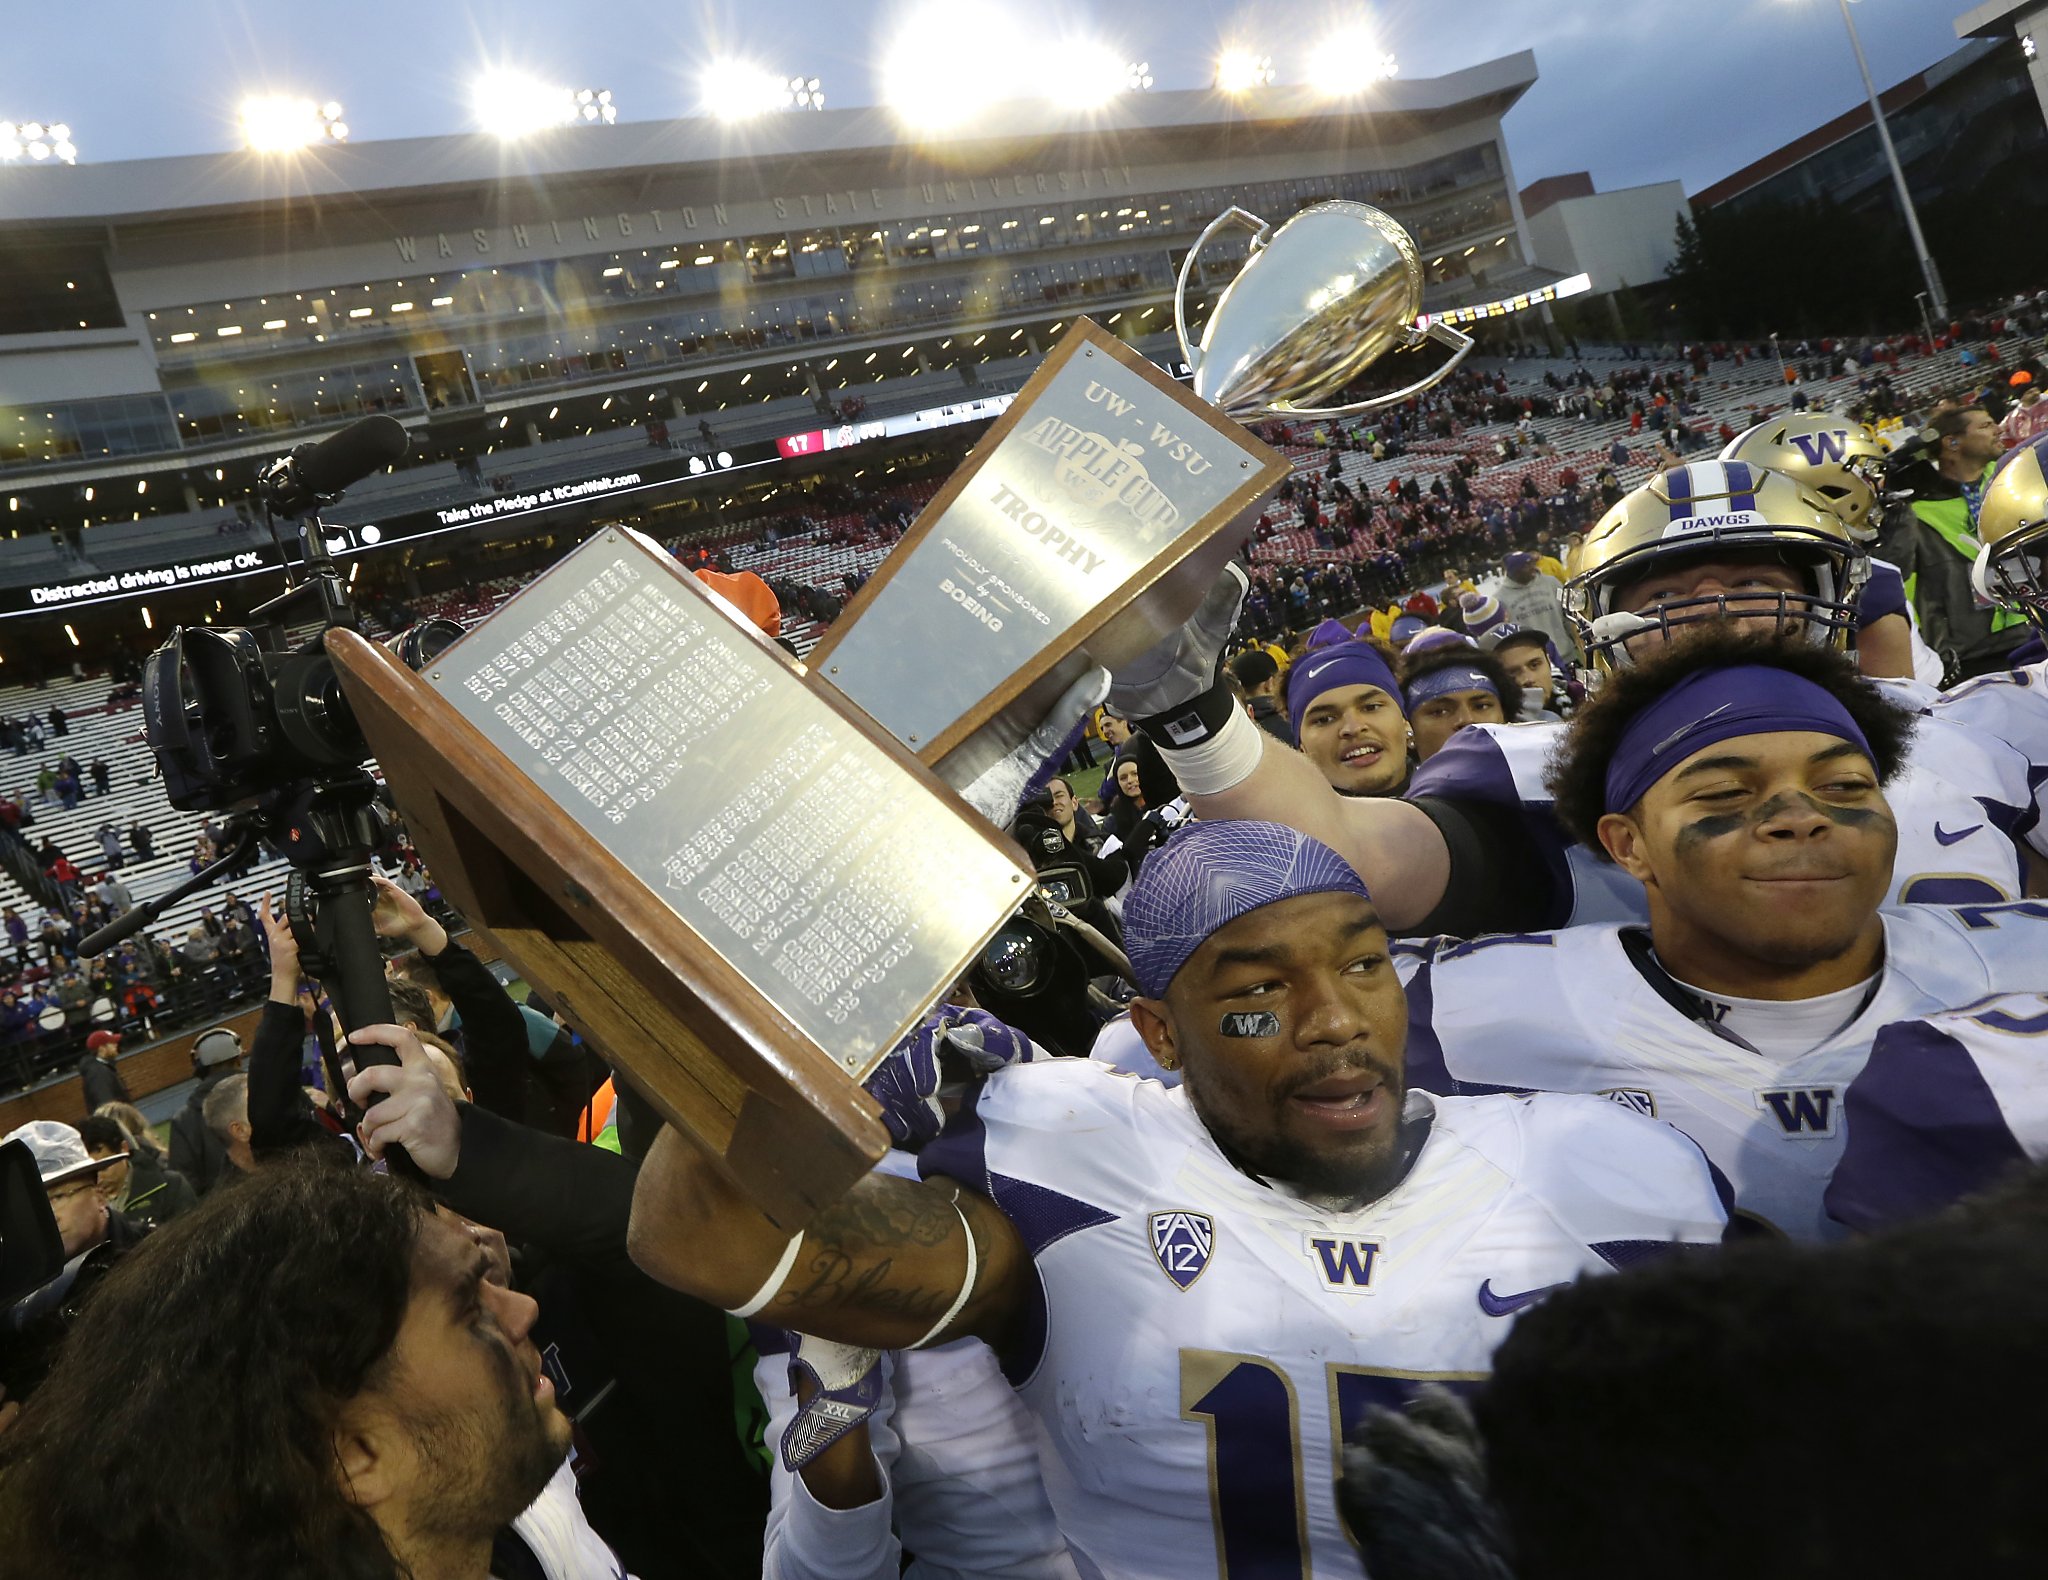 Washington’s Apple Cup will draw plenty of attention in California